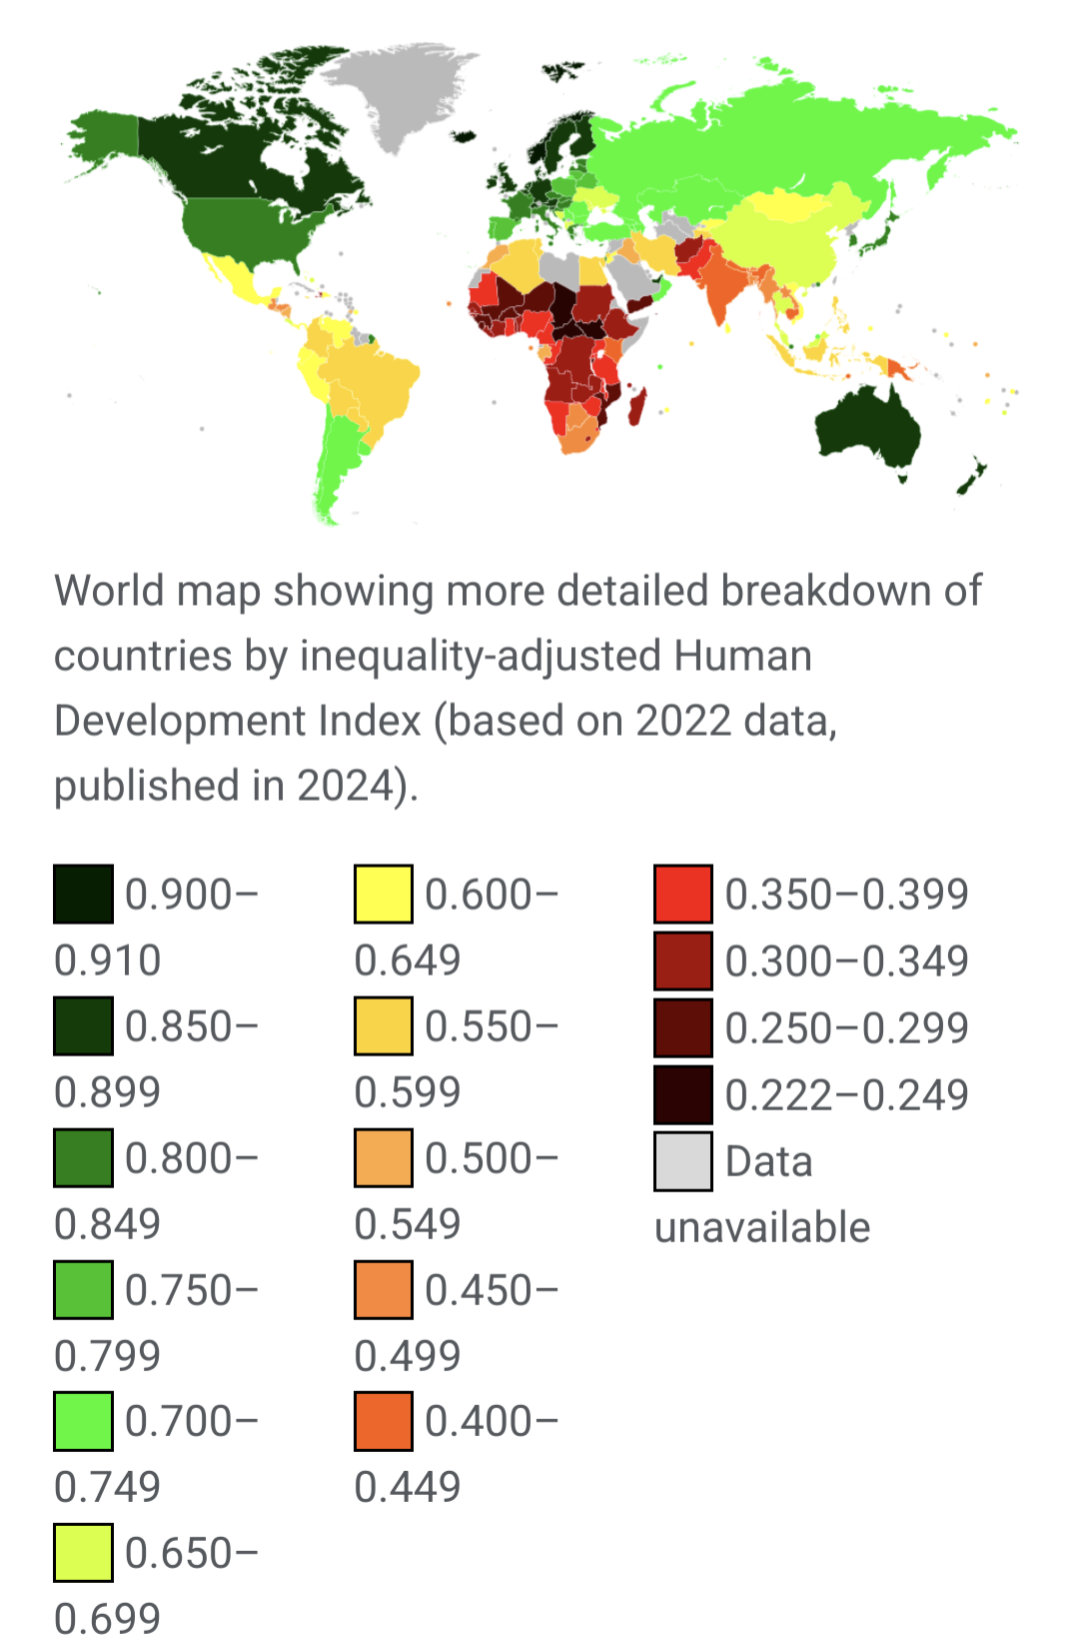 World map showing more detailed breakdown of countries by inequality-adjusted Human Development Index (based on 2022 data, published in 2024).